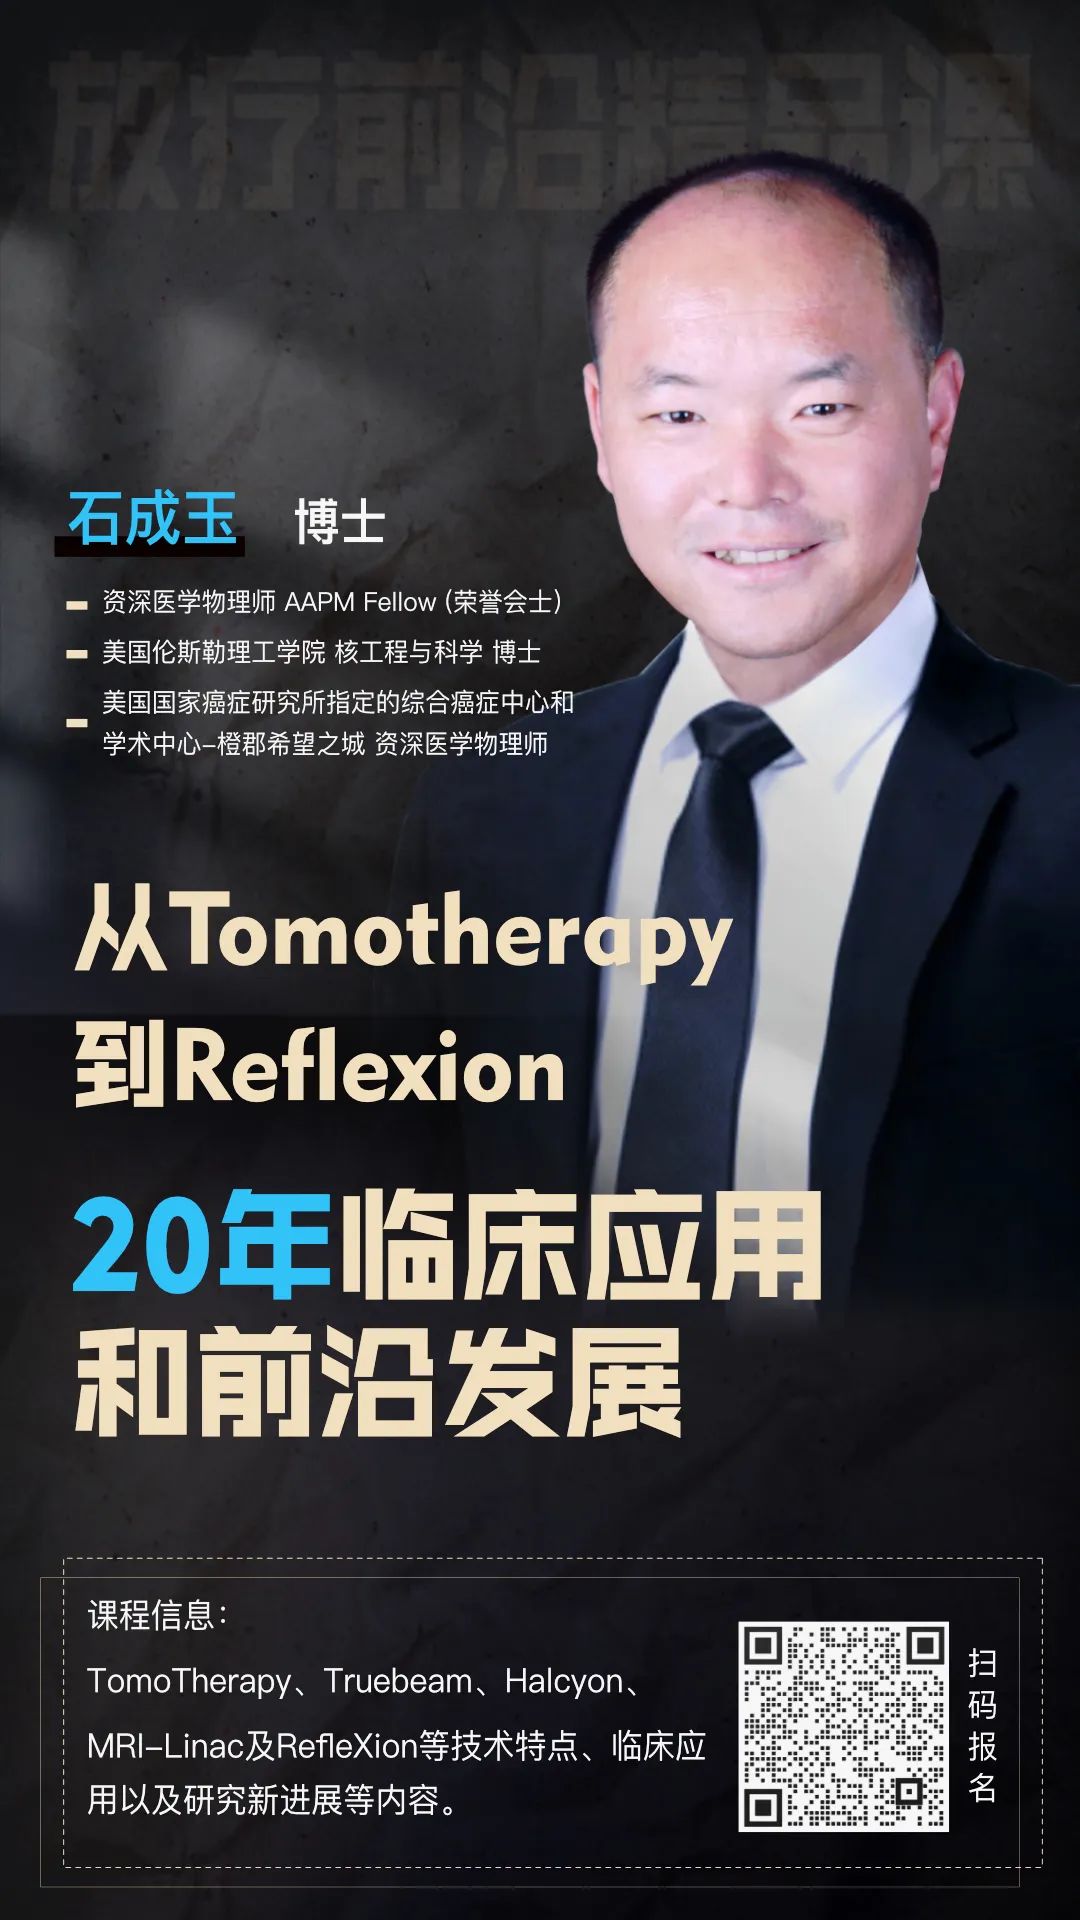 <font color="red">前沿</font>技术学习之旅：从Tomotherapy到 Reflexion20年临床应用和<font color="red">前沿</font>发展